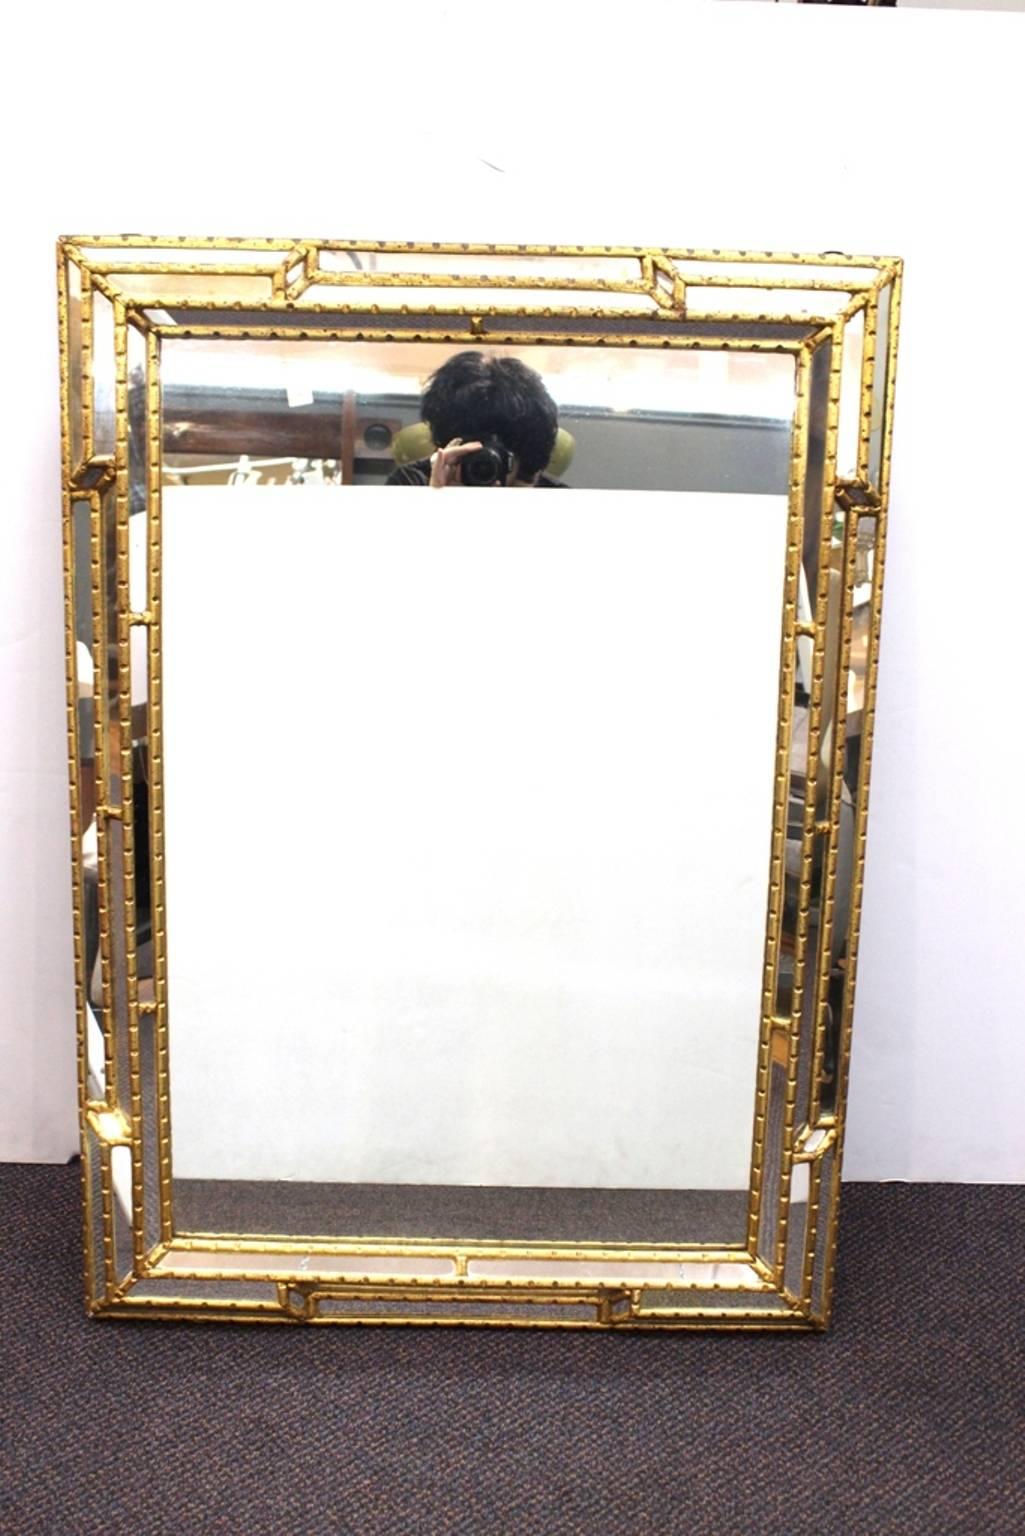 A Venetian mirror in a bevelled gilt frame. Stamped [Made in Italy] on the back. In good condition.